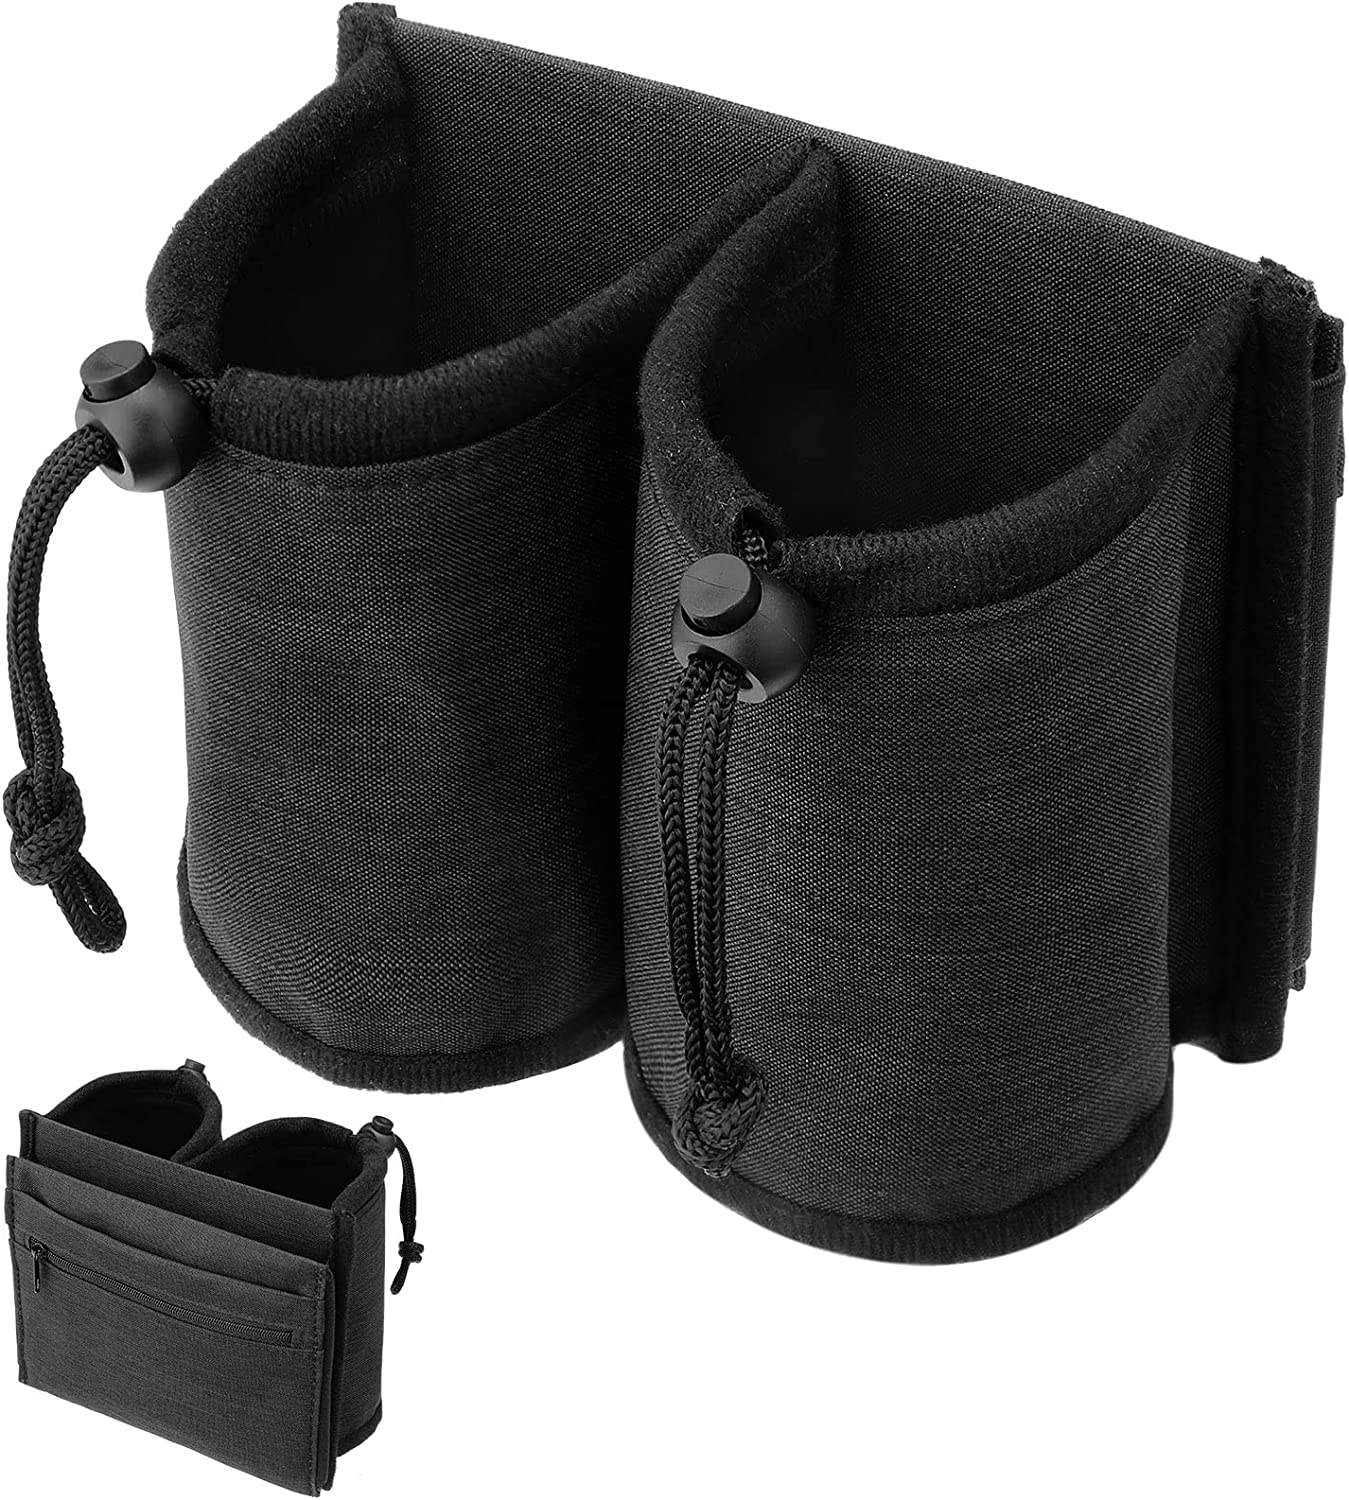 Luggage Travel Cup Holder Bag – SLM Bookings Travel Store